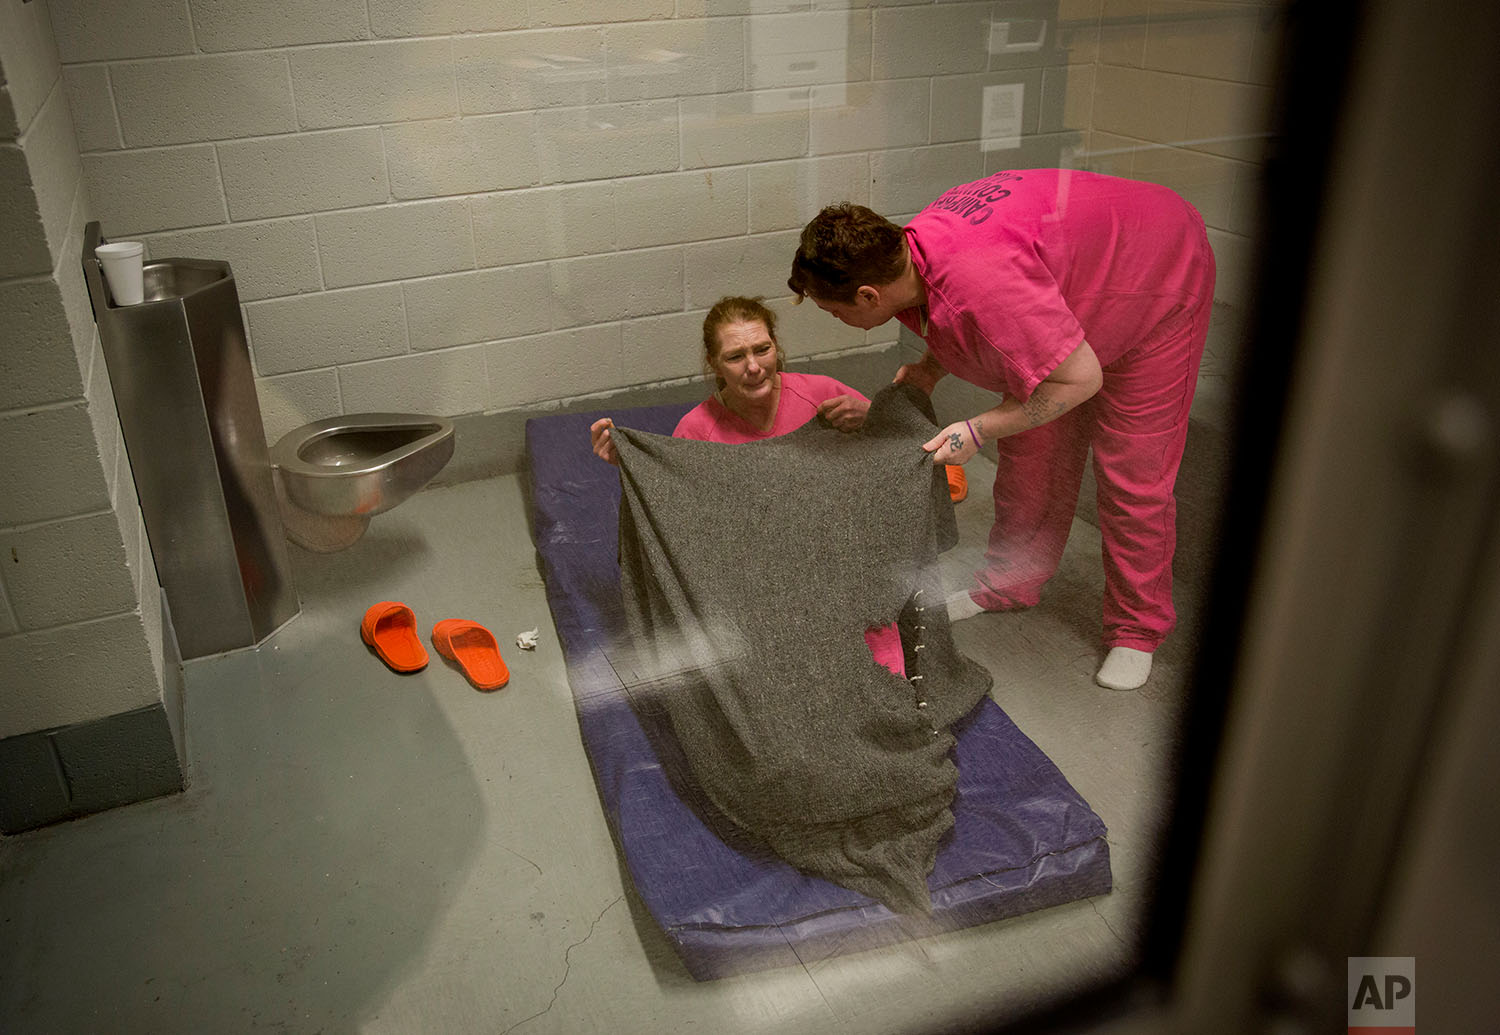  Mary Sammons helps cover Linda Green with a blanket as she lies down in the Campbell County Jail after being arrested on charges of public intoxication, a parole violation, in Jacksboro, Tenn., Thursday, March 29, 2018. (AP Photo/David Goldman) 